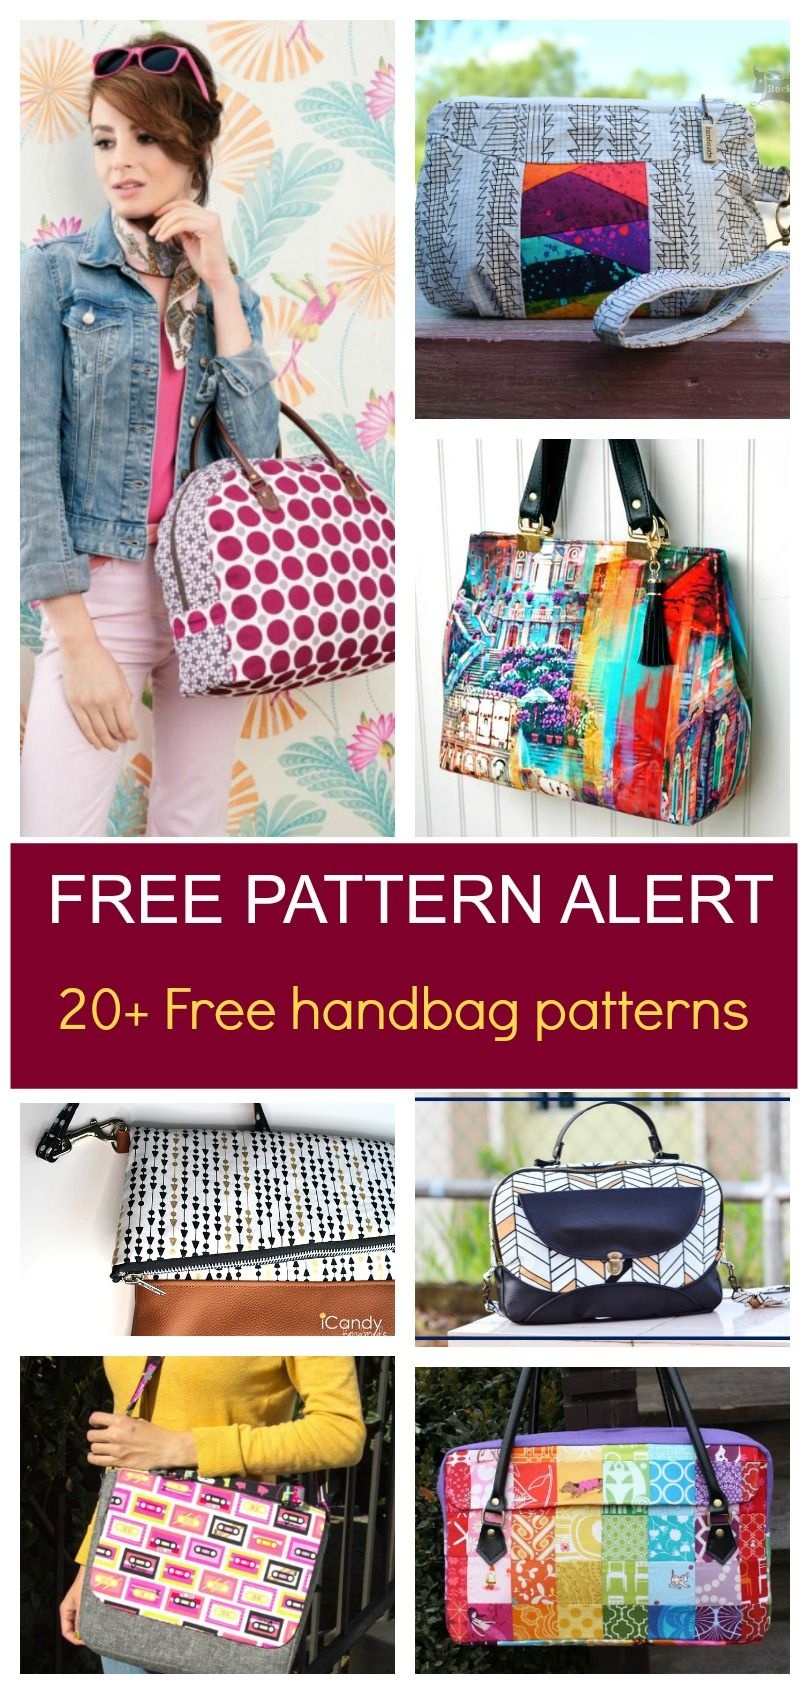 Pdf Sewing Patterns | On The Cutting Floor | Sewing Patterns Free - Handbag Patterns Free Printable